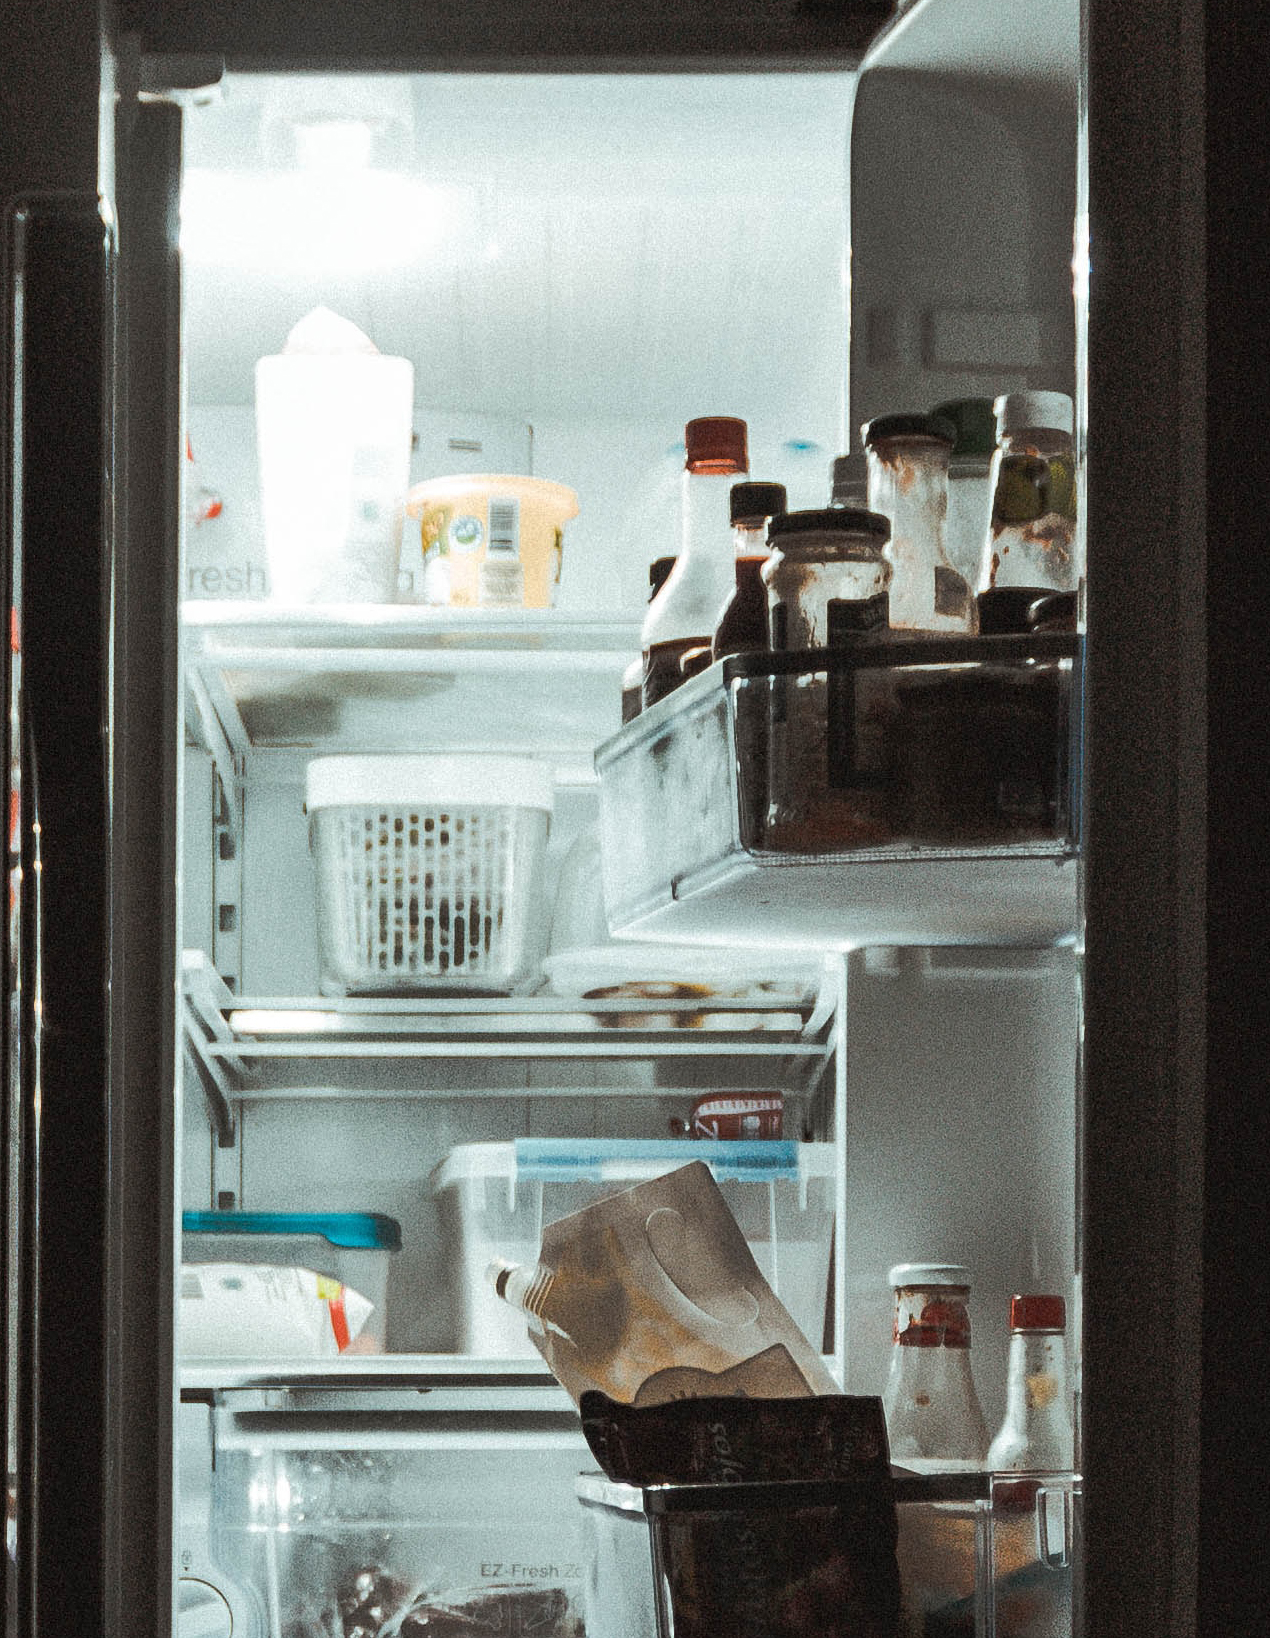 A fridge door open revealing ketchup and sauces on the door and plastic containers on the shelves. 